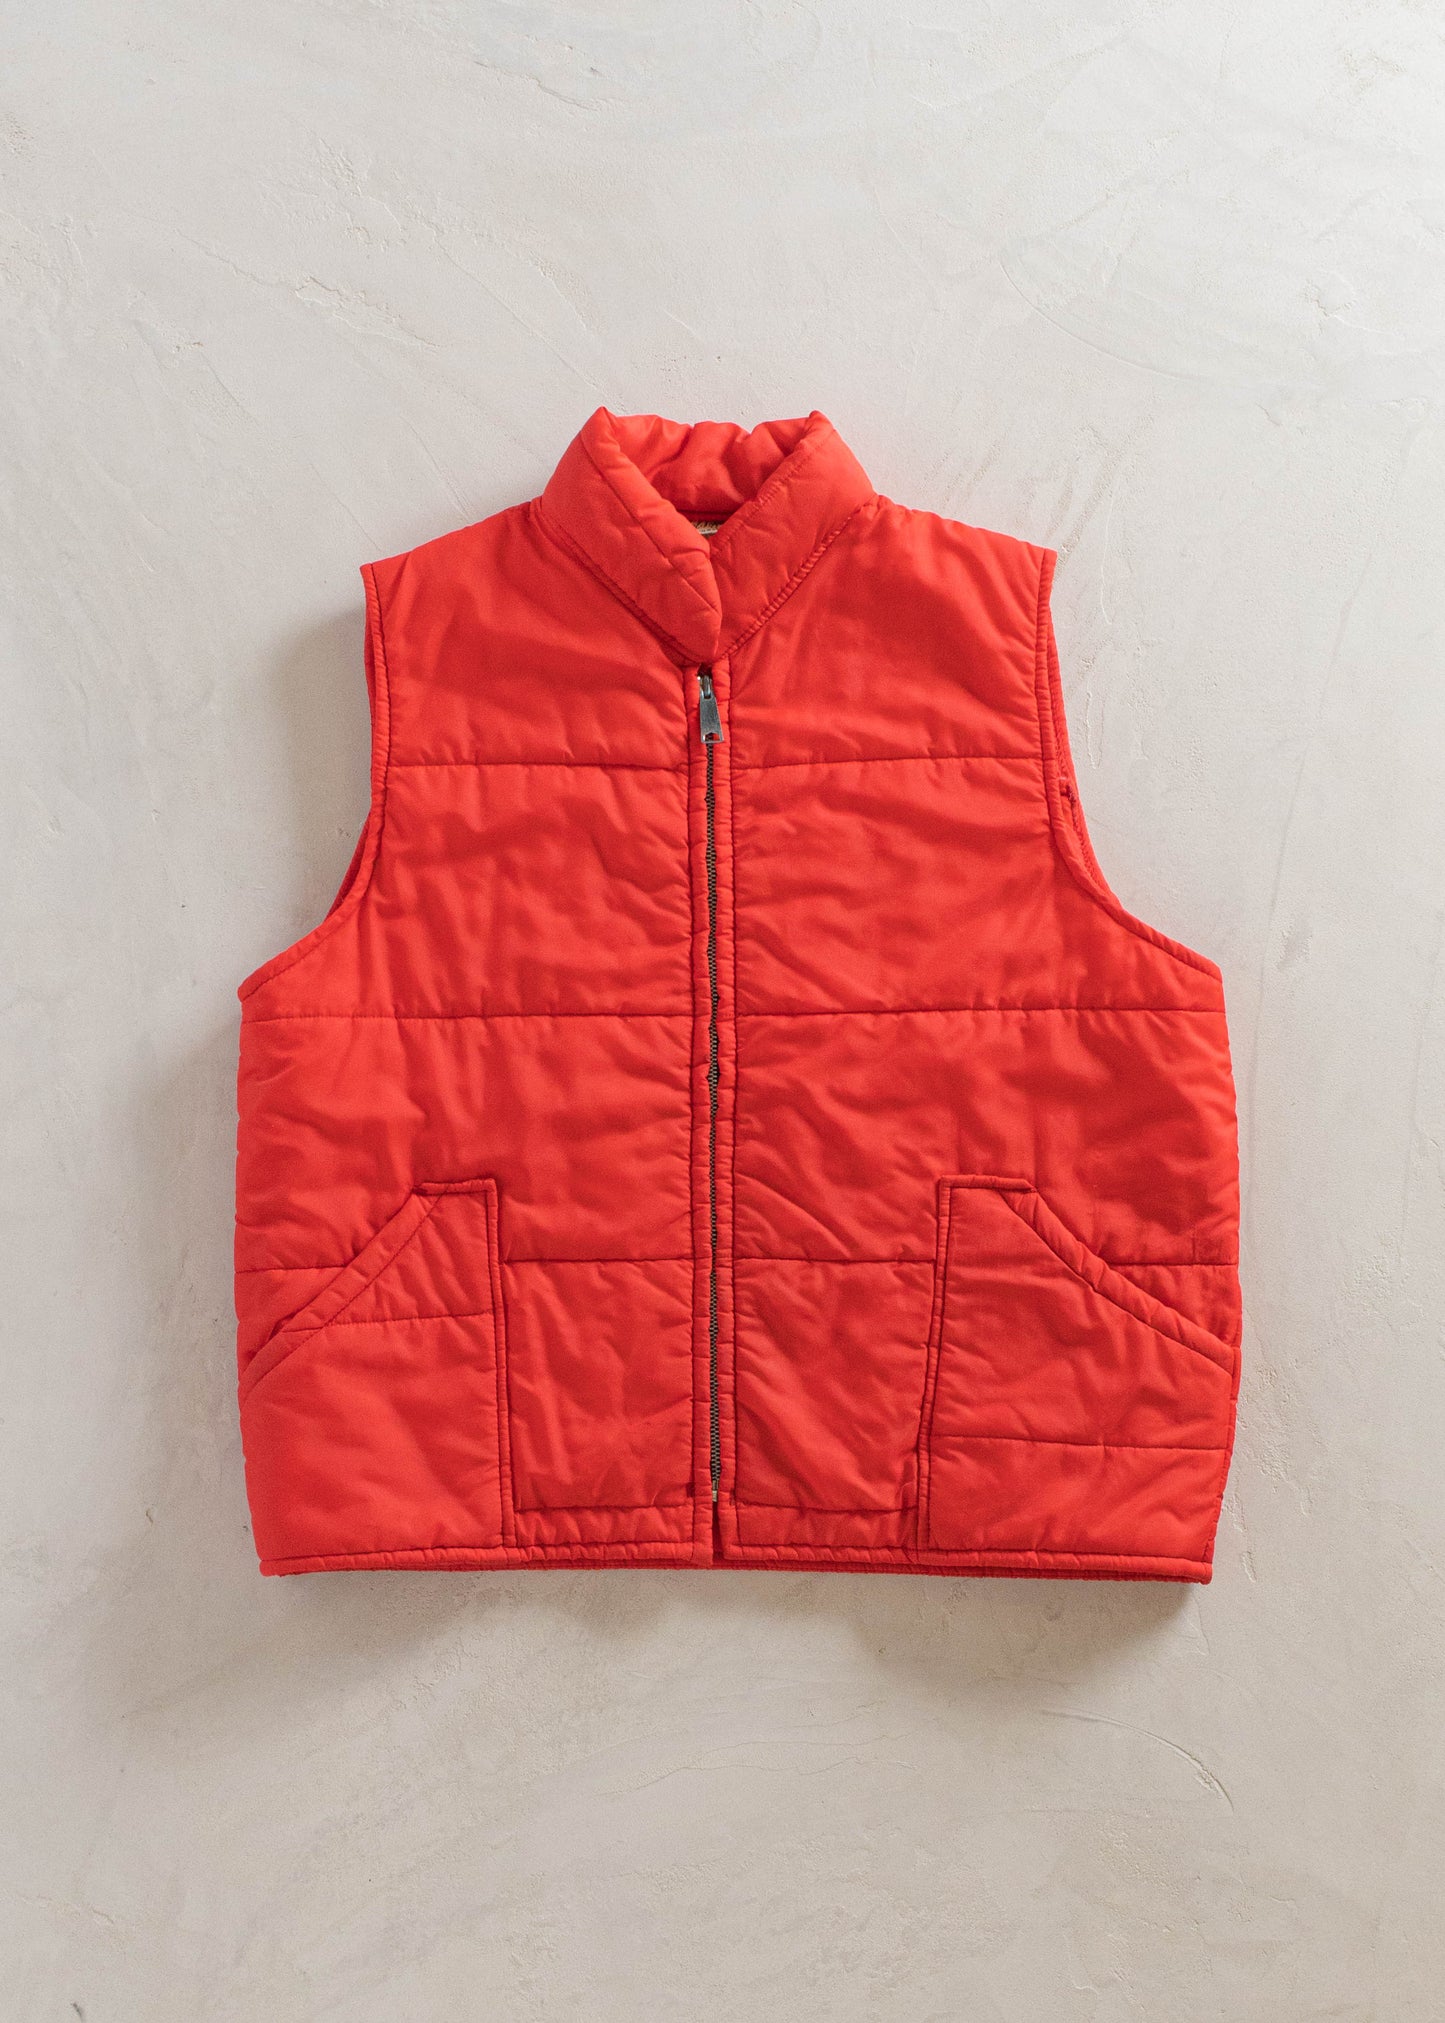 1970s Tuf Topper Quilted Nylon Vest Size M/L